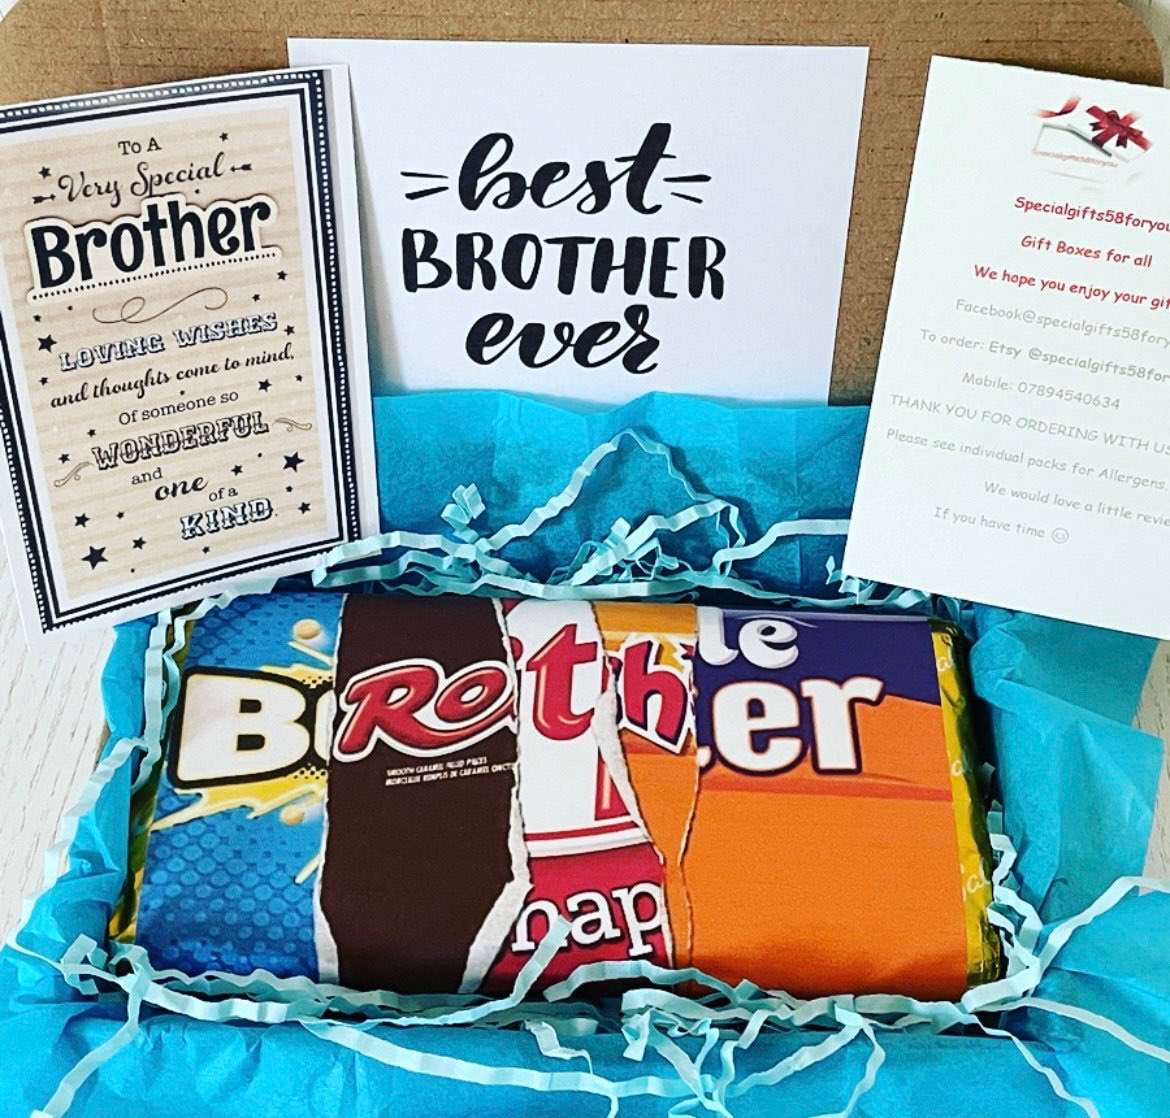 Best brother ever gift! 

#brothergift #giftforbrother #brotherbirthday #bestbrothergift #etsy #etsygifts ⁦@specialgifts58⁩ specialgifts58foryou.etsy.com/listing/107934…